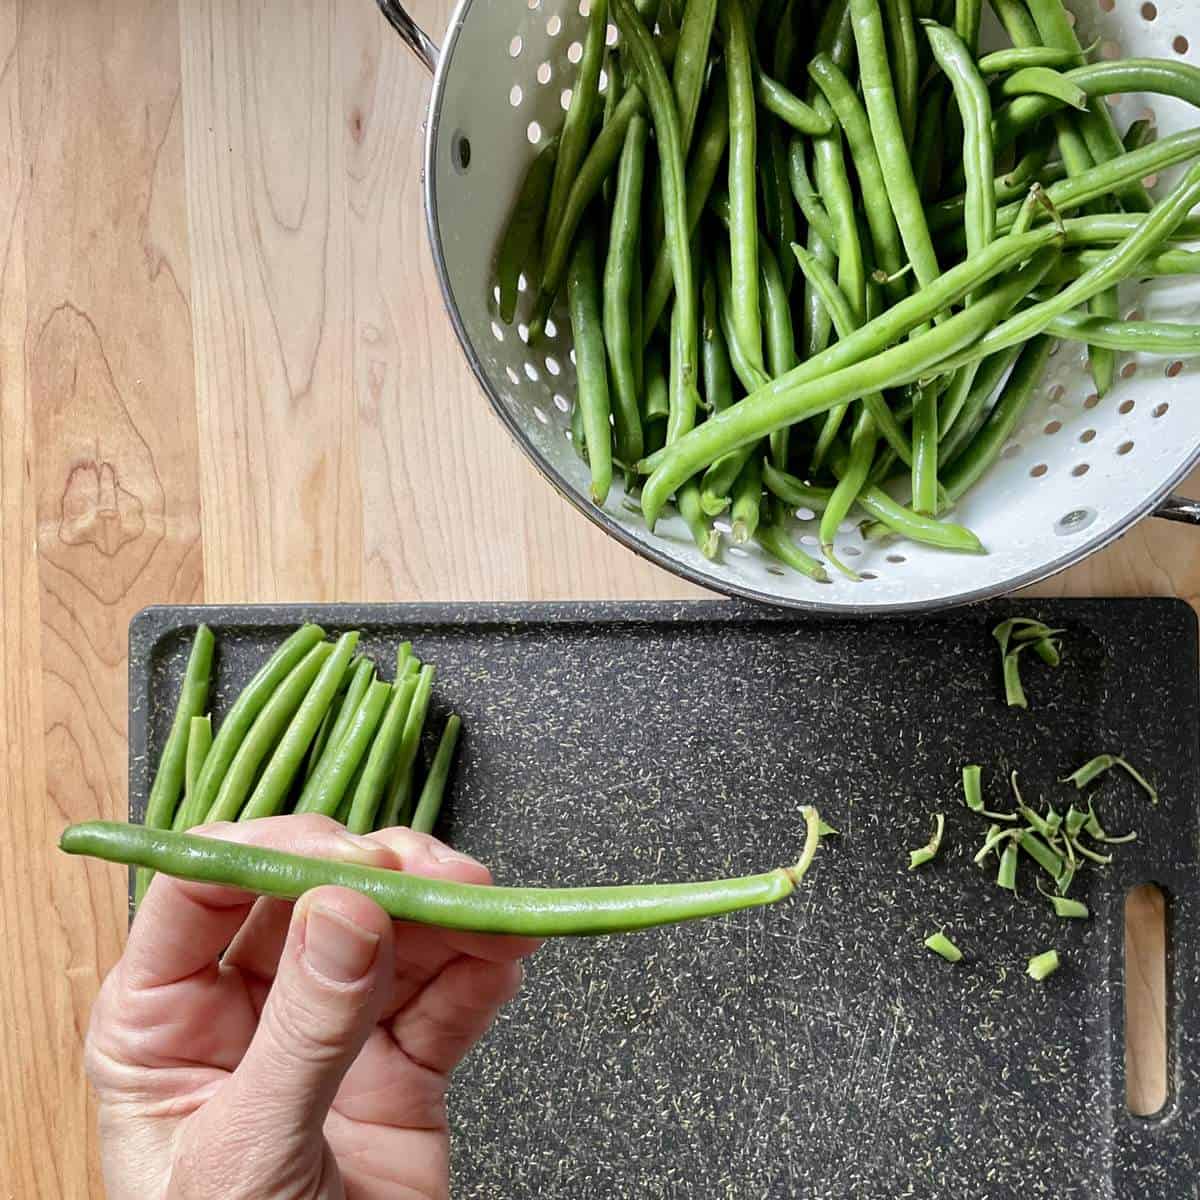 A green bean is held with one hand.